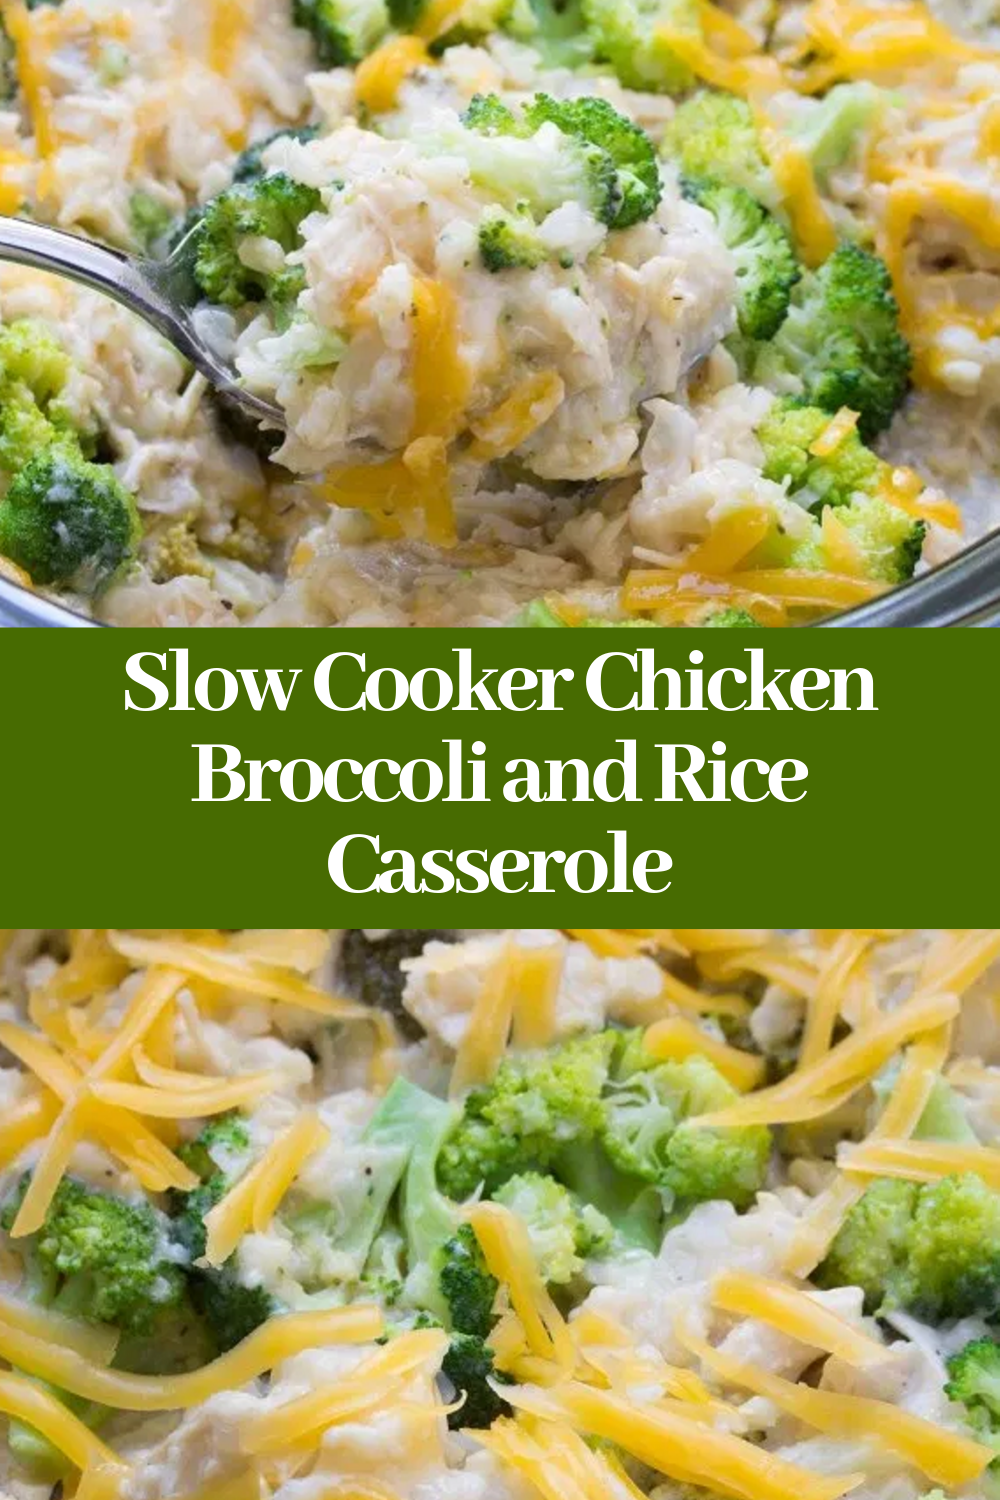 Slow Cooker Chicken Broccoli and Rice Casserole